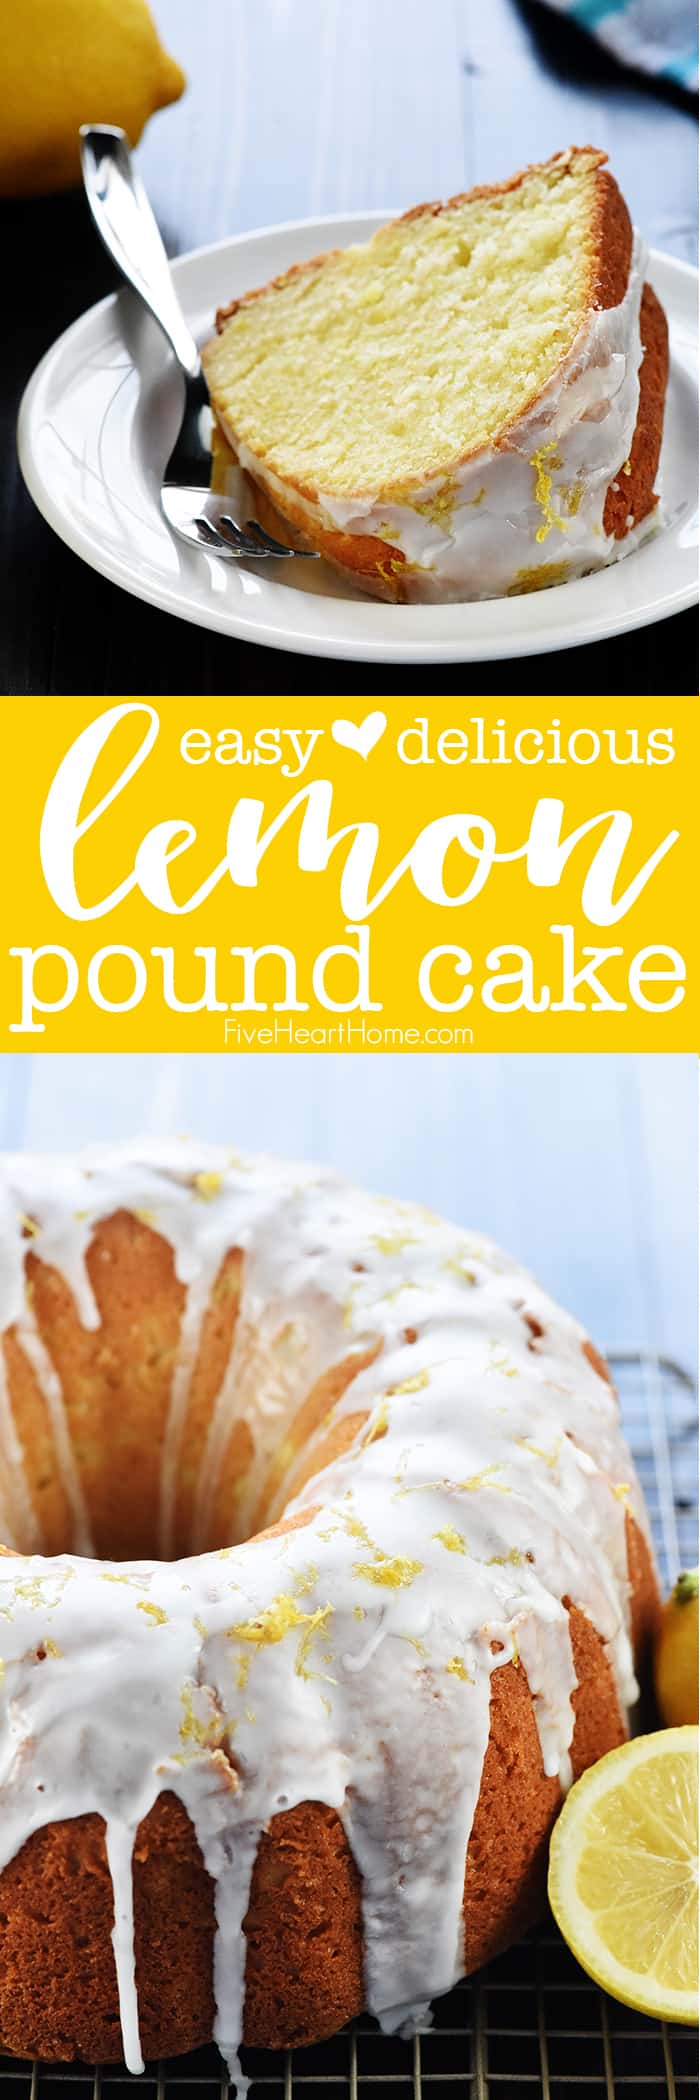 Lemon Pound Cake ~ an easy, scrumptious recipe for a soft, moist cake with a golden exterior and a tangy lemon glaze...the perfect dessert recipe for spring or summer, from Easter to Mother's Day to Memorial Day and more! | FiveHeartHome.com via @fivehearthome